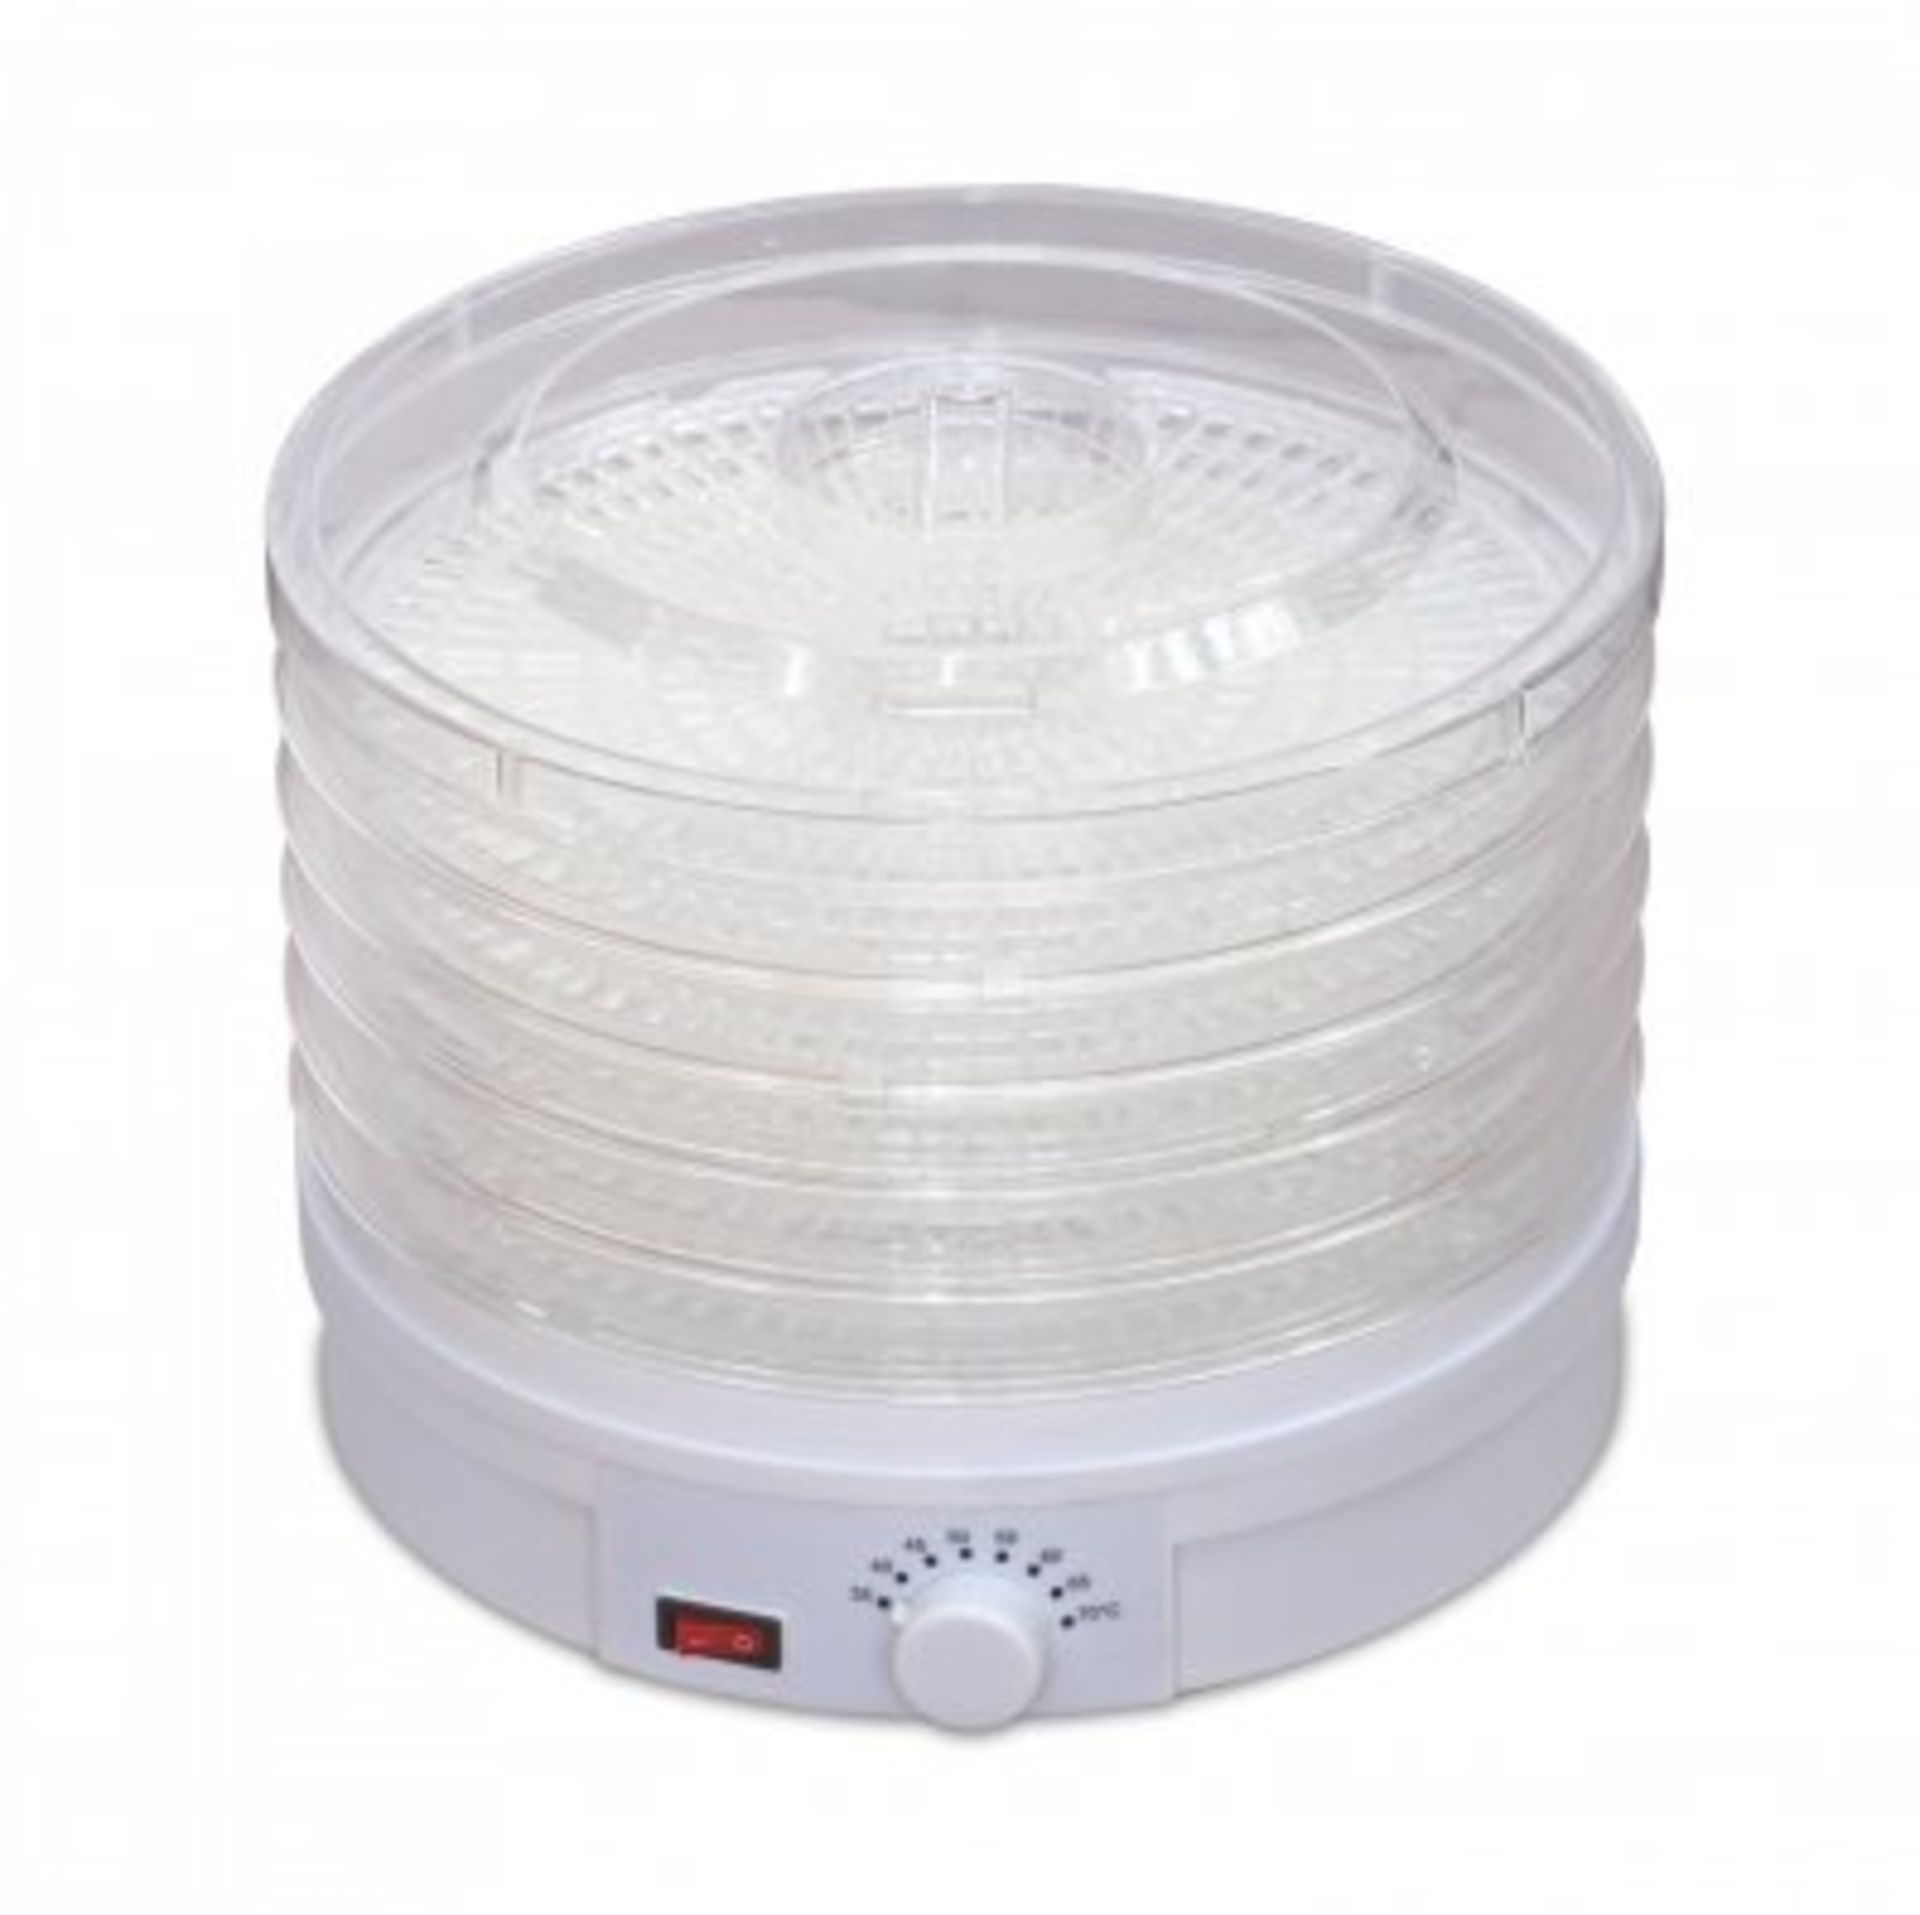 (PP30) Food Dehydrator Machine with Thermostat Control The Food Dehydrator uses a Flow-...